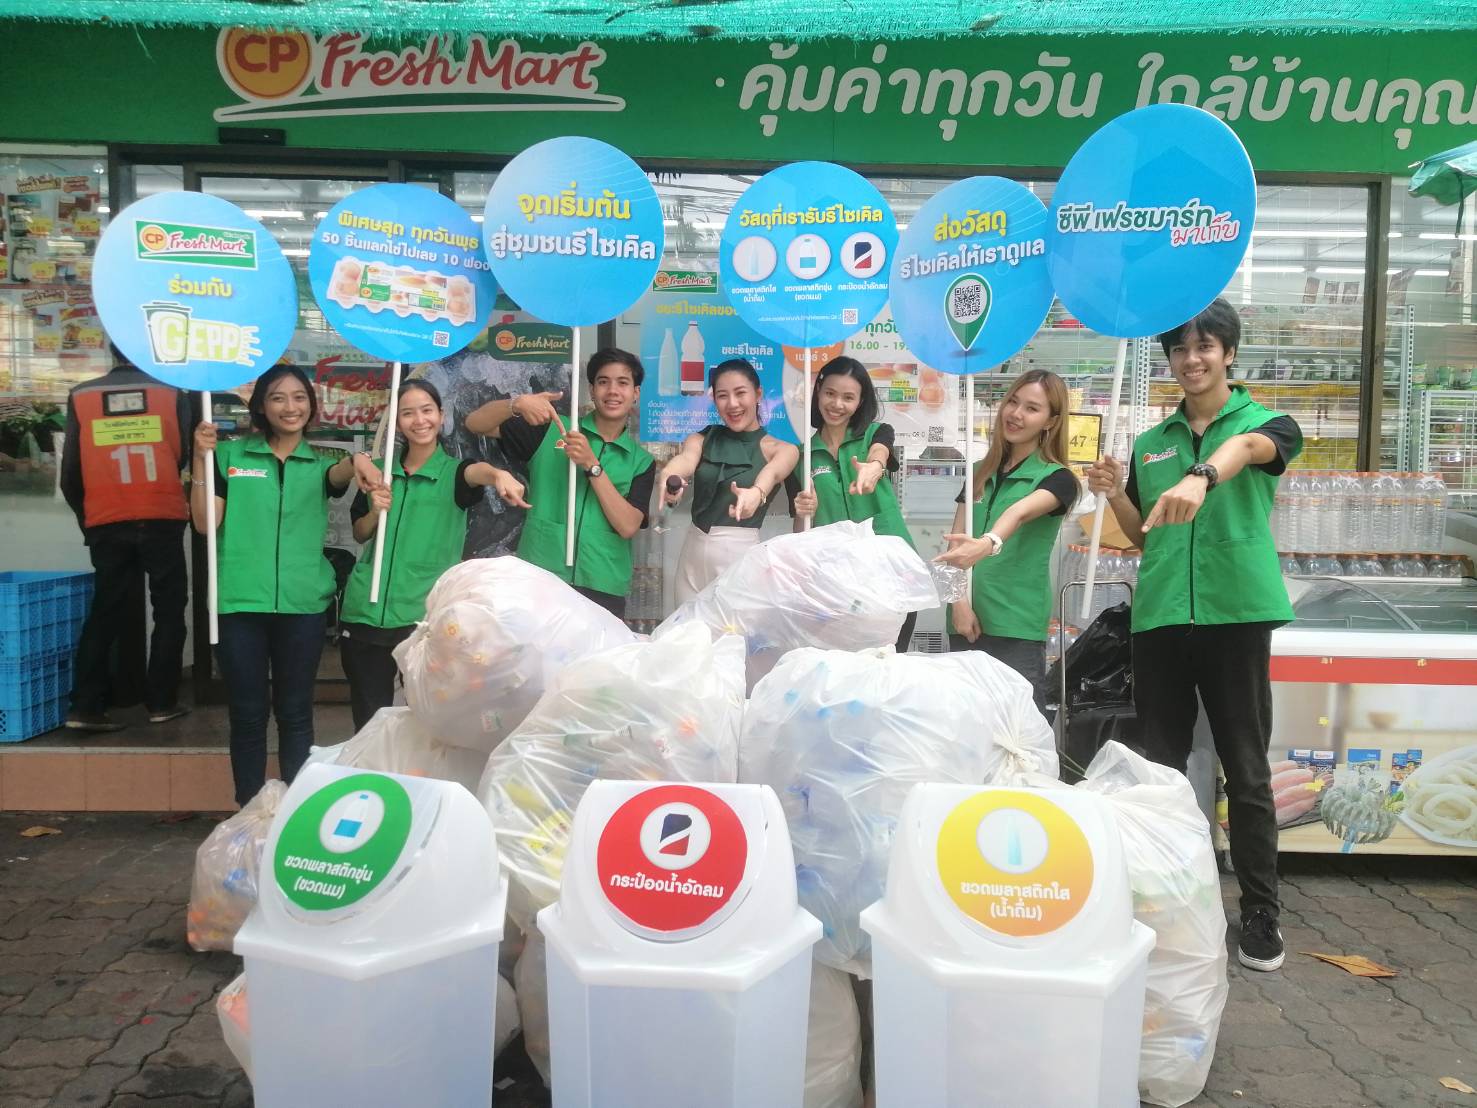 CP Freshmart joined hands with GEPP to change consumer's habit